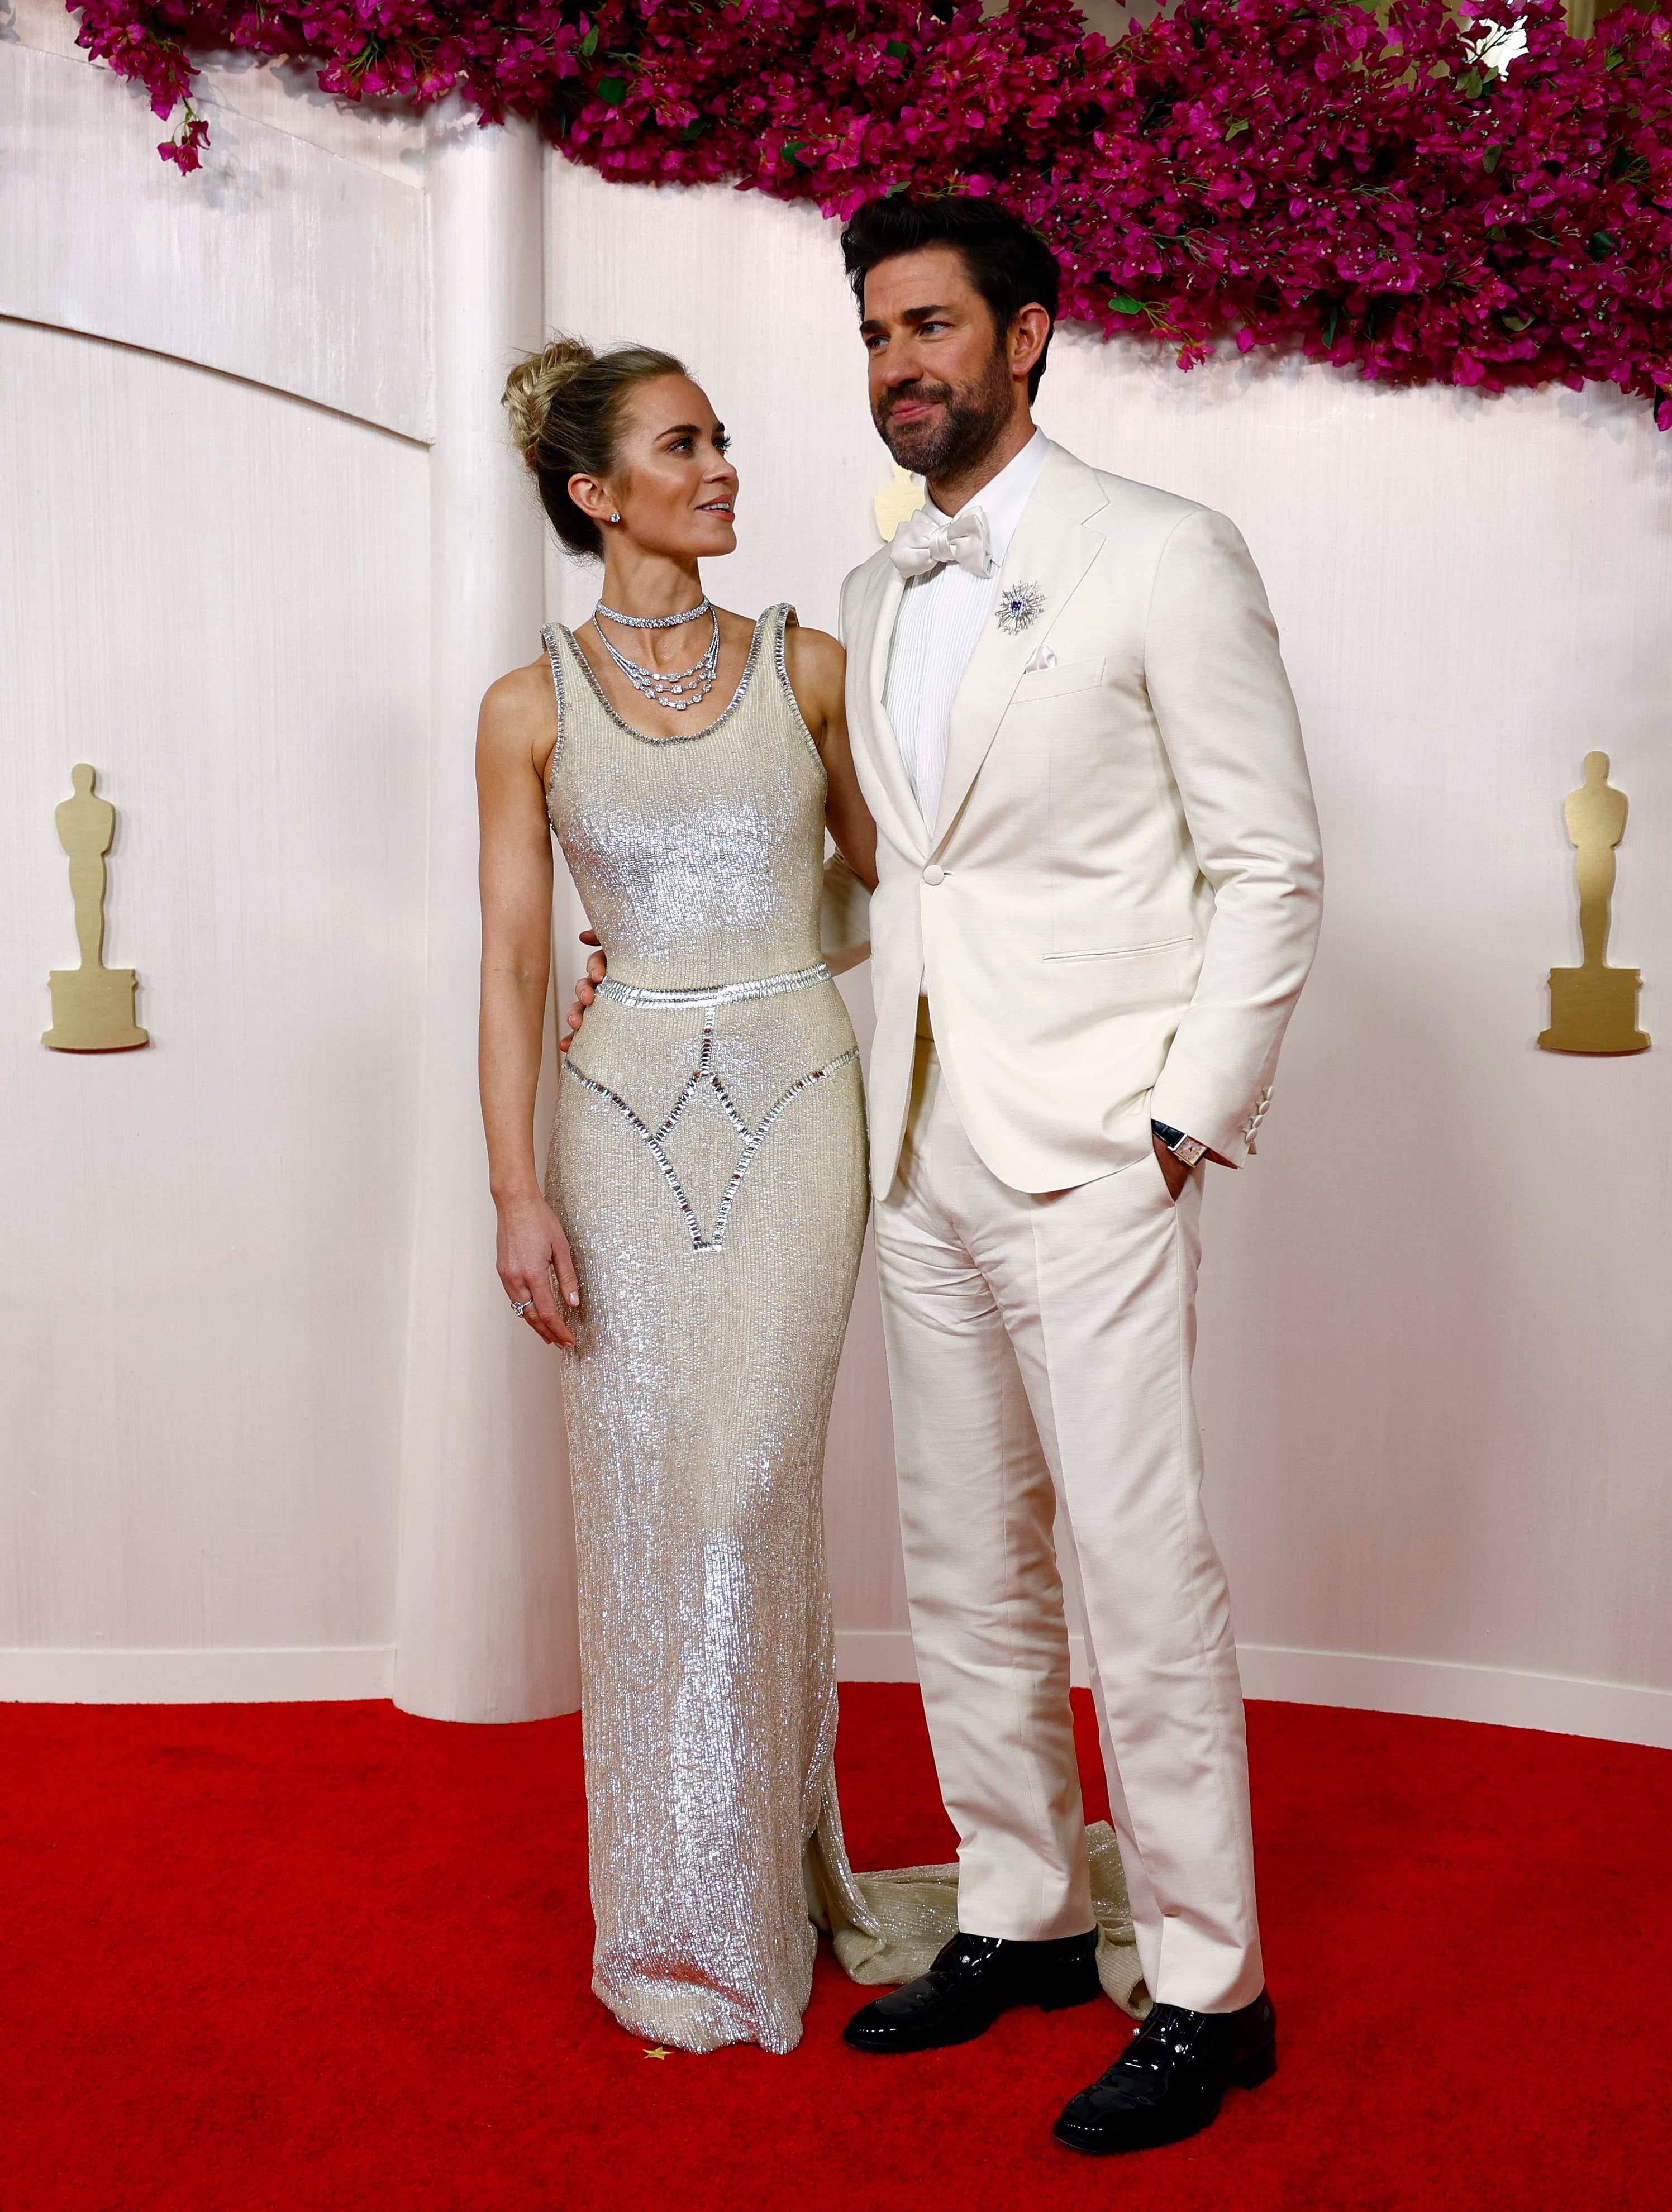 John Krasinski and Emily Blunt pose on the red carpet during the Oscars arrivals at the 96th Academy Awards in Hollywood, Los Angeles, California, U.S., March 10, 2024. REUTERS/Sarah Meyssonnier (REUTERS)